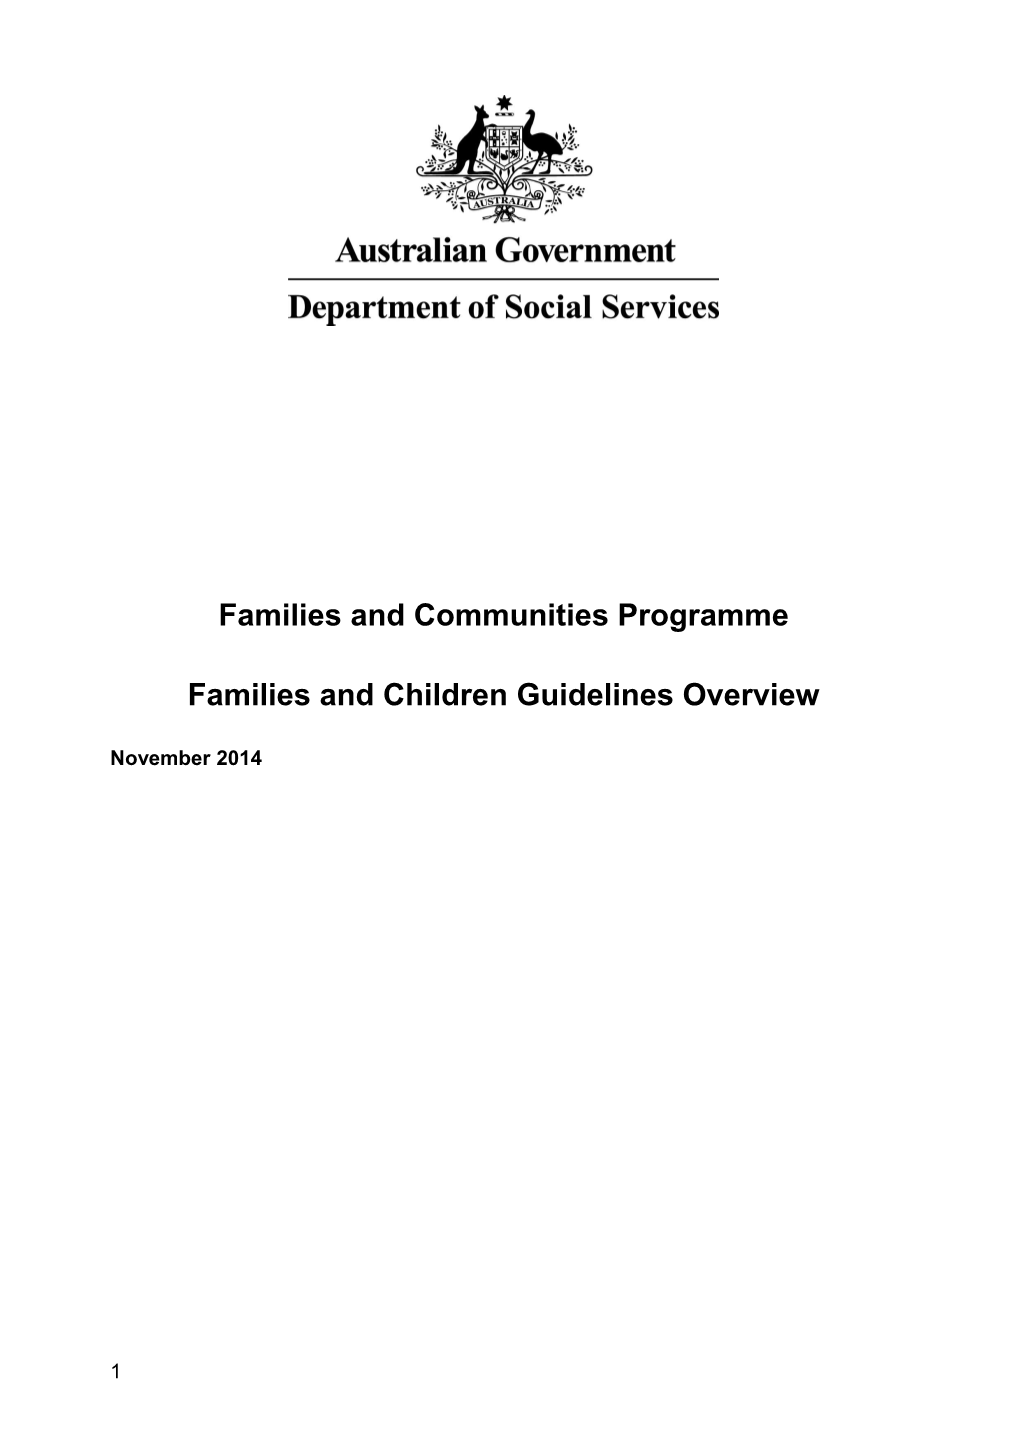 Families and Children Programme Overview